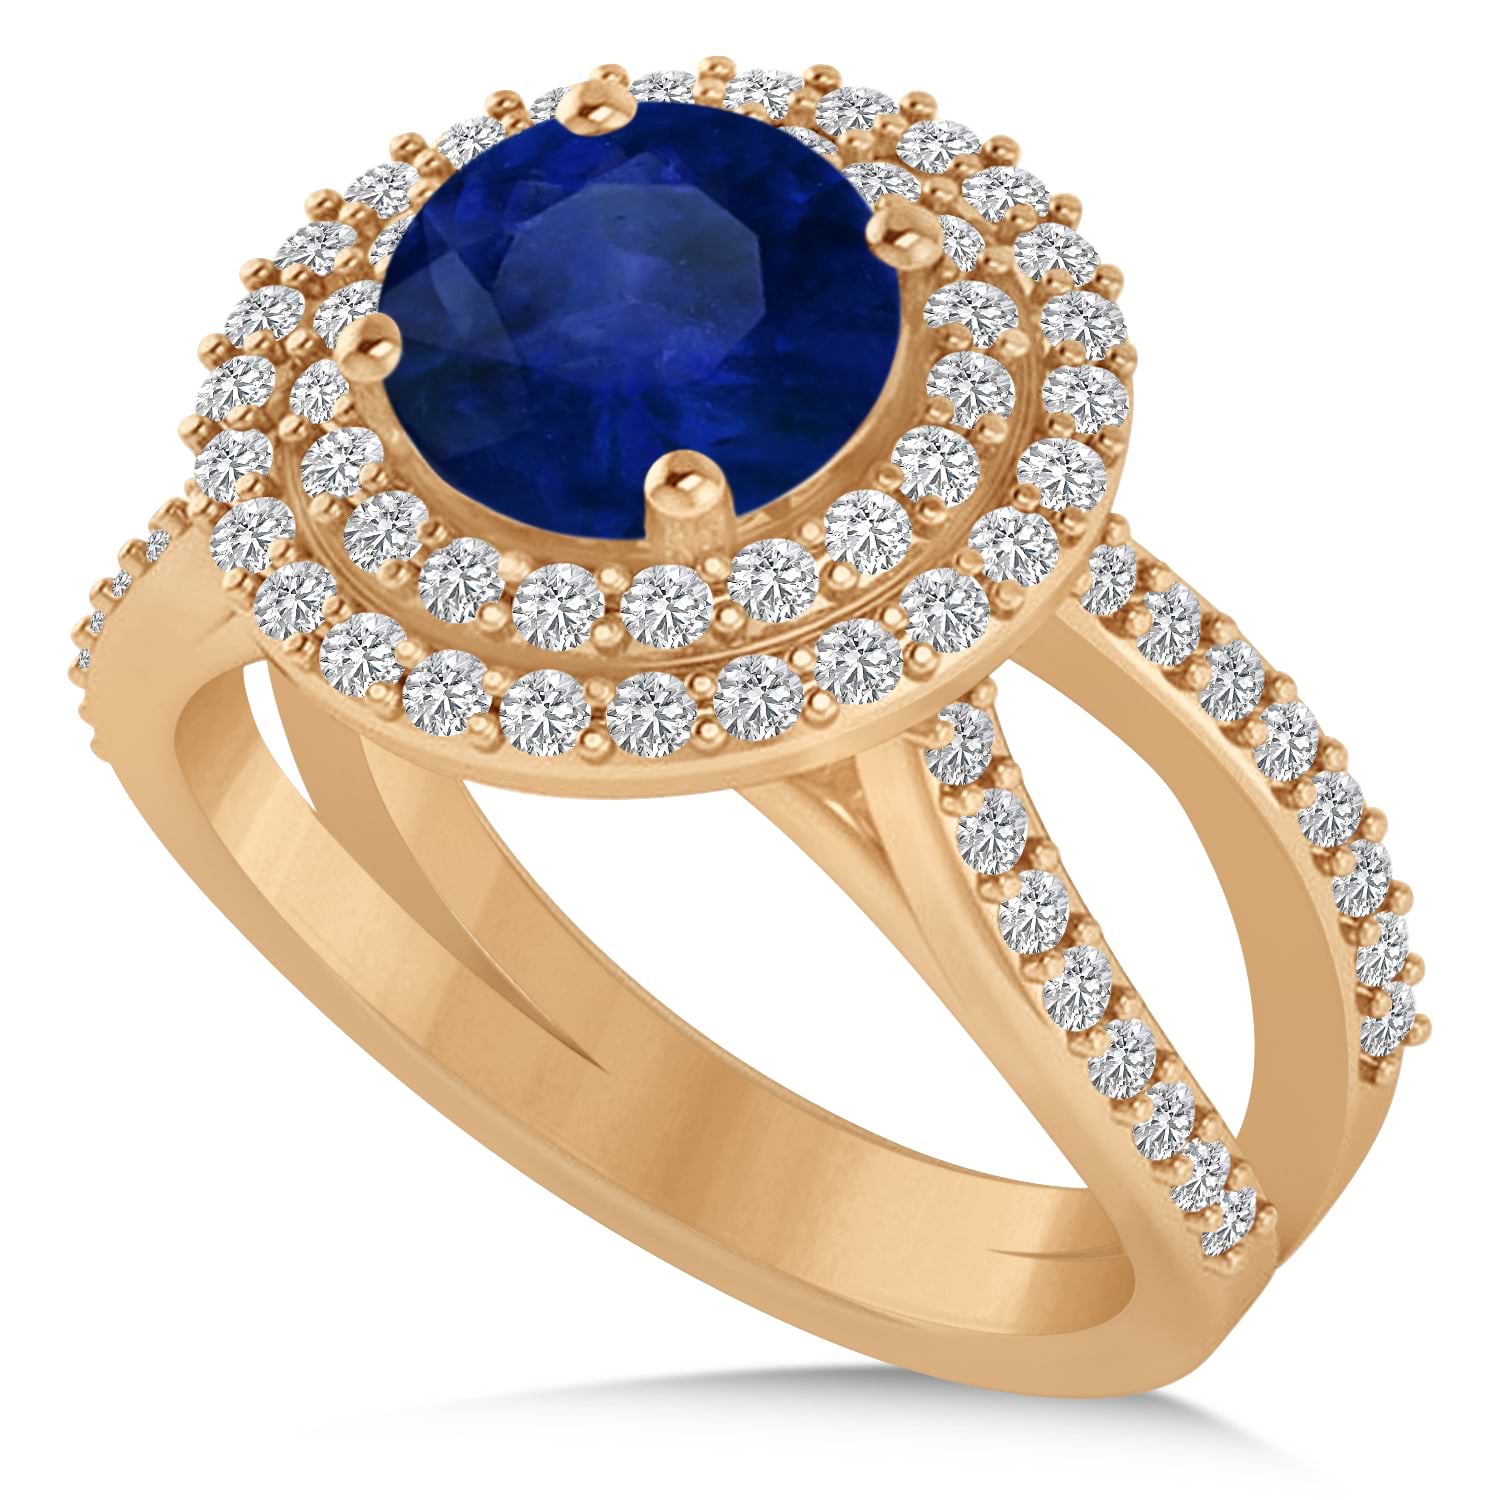 Double Halo Blue Sapphire Engagement Ring 14k Rose Gold (2.27ct)